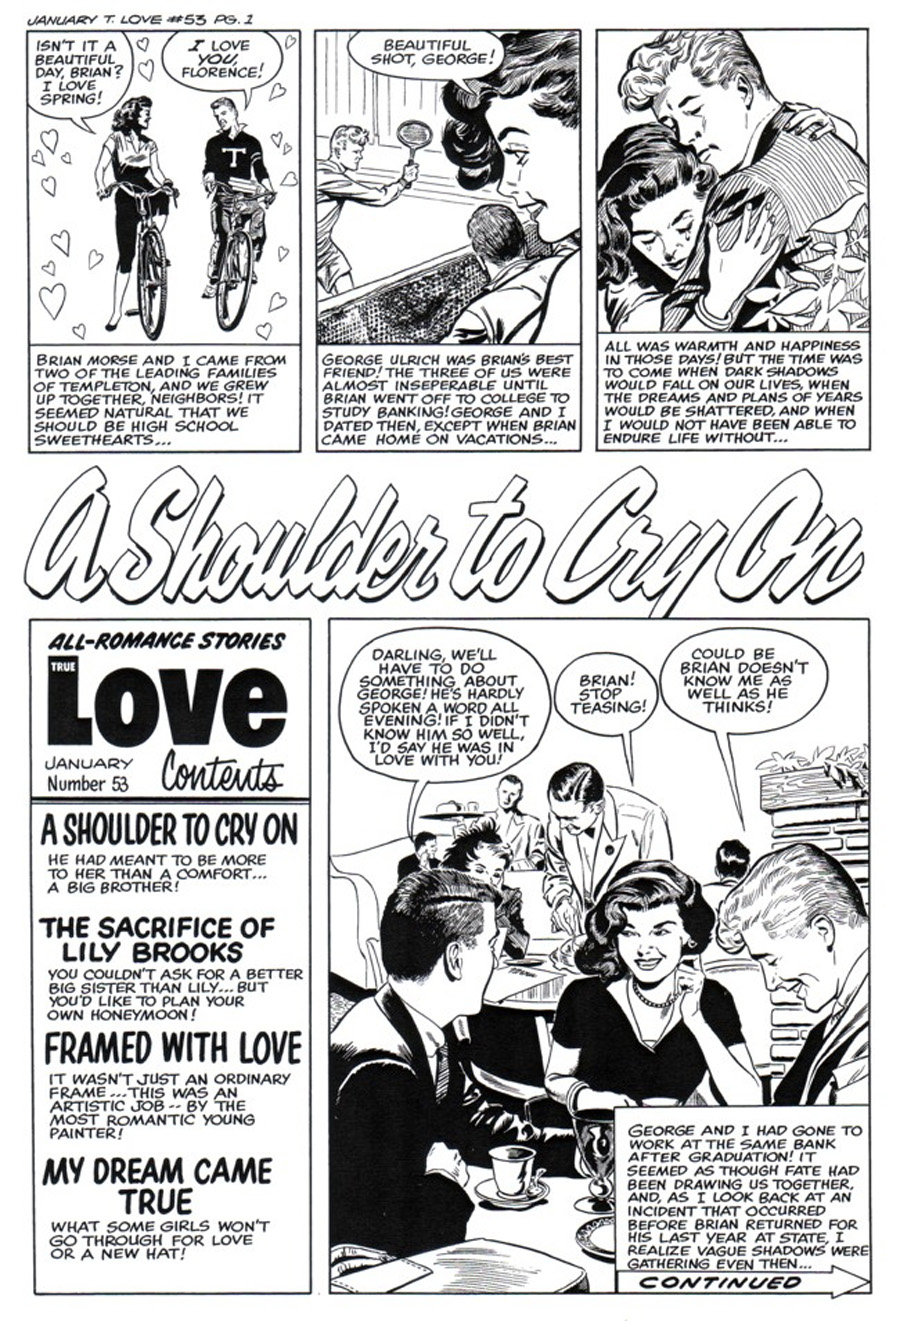 Page from “True Love” #53, 1958